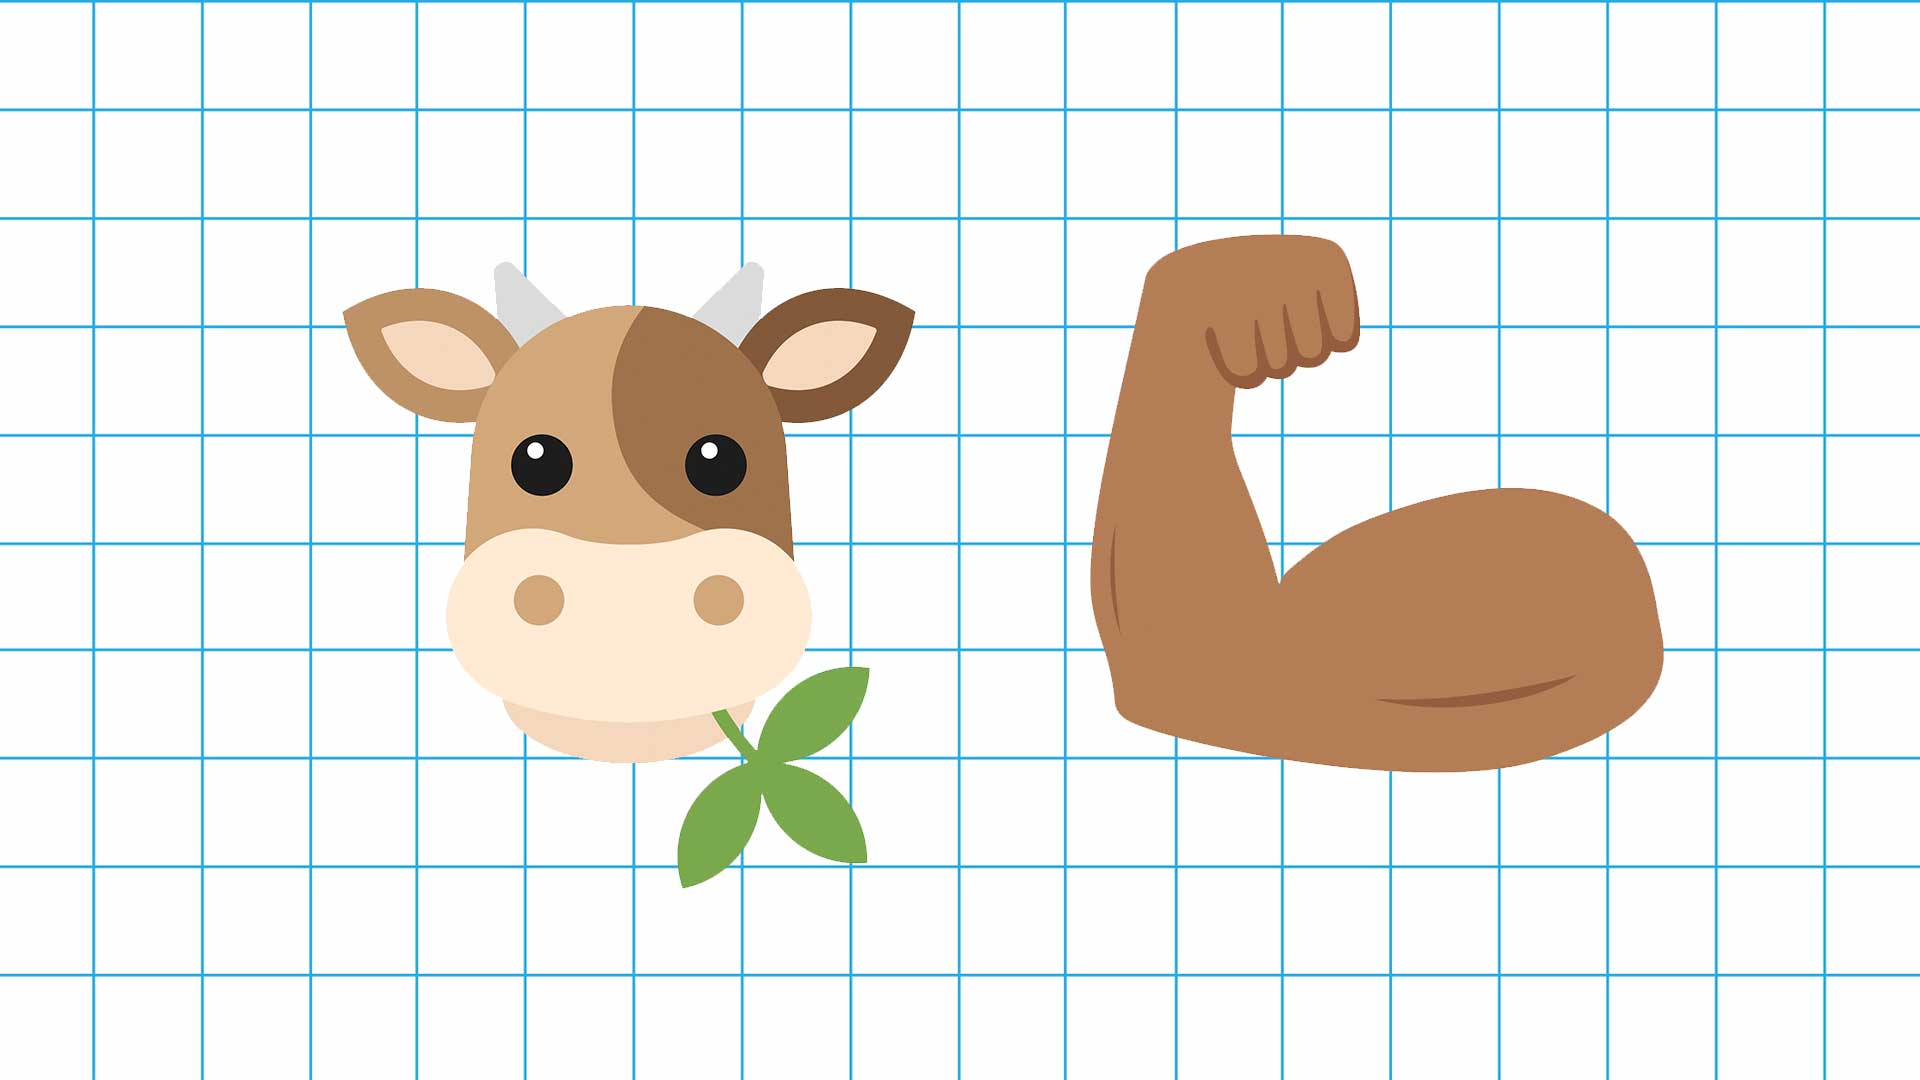 A cow and a muscly arm emoji